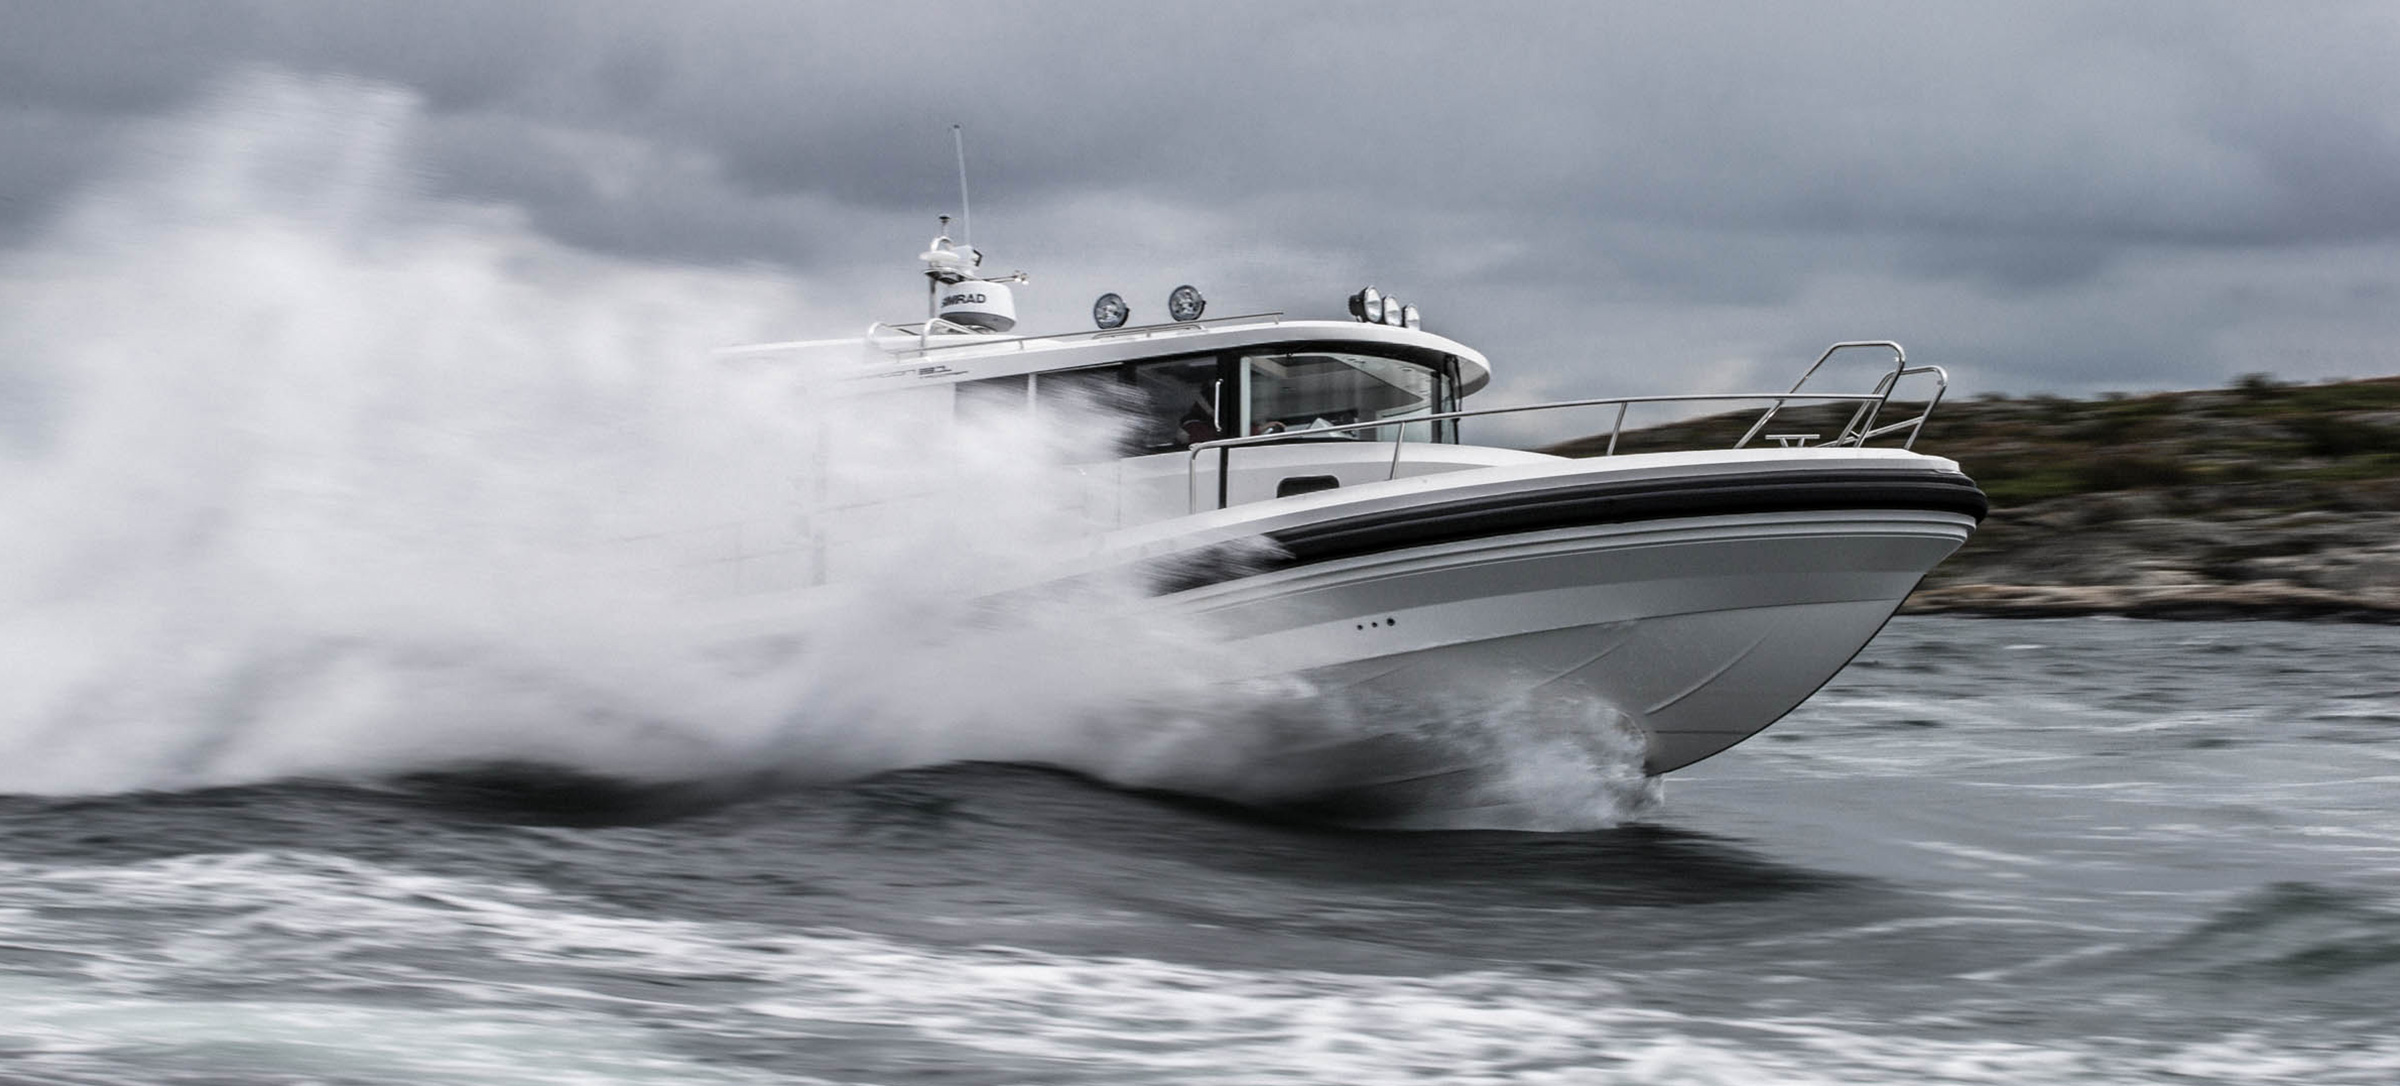 Paragon Yacht in action on the water, driving fast